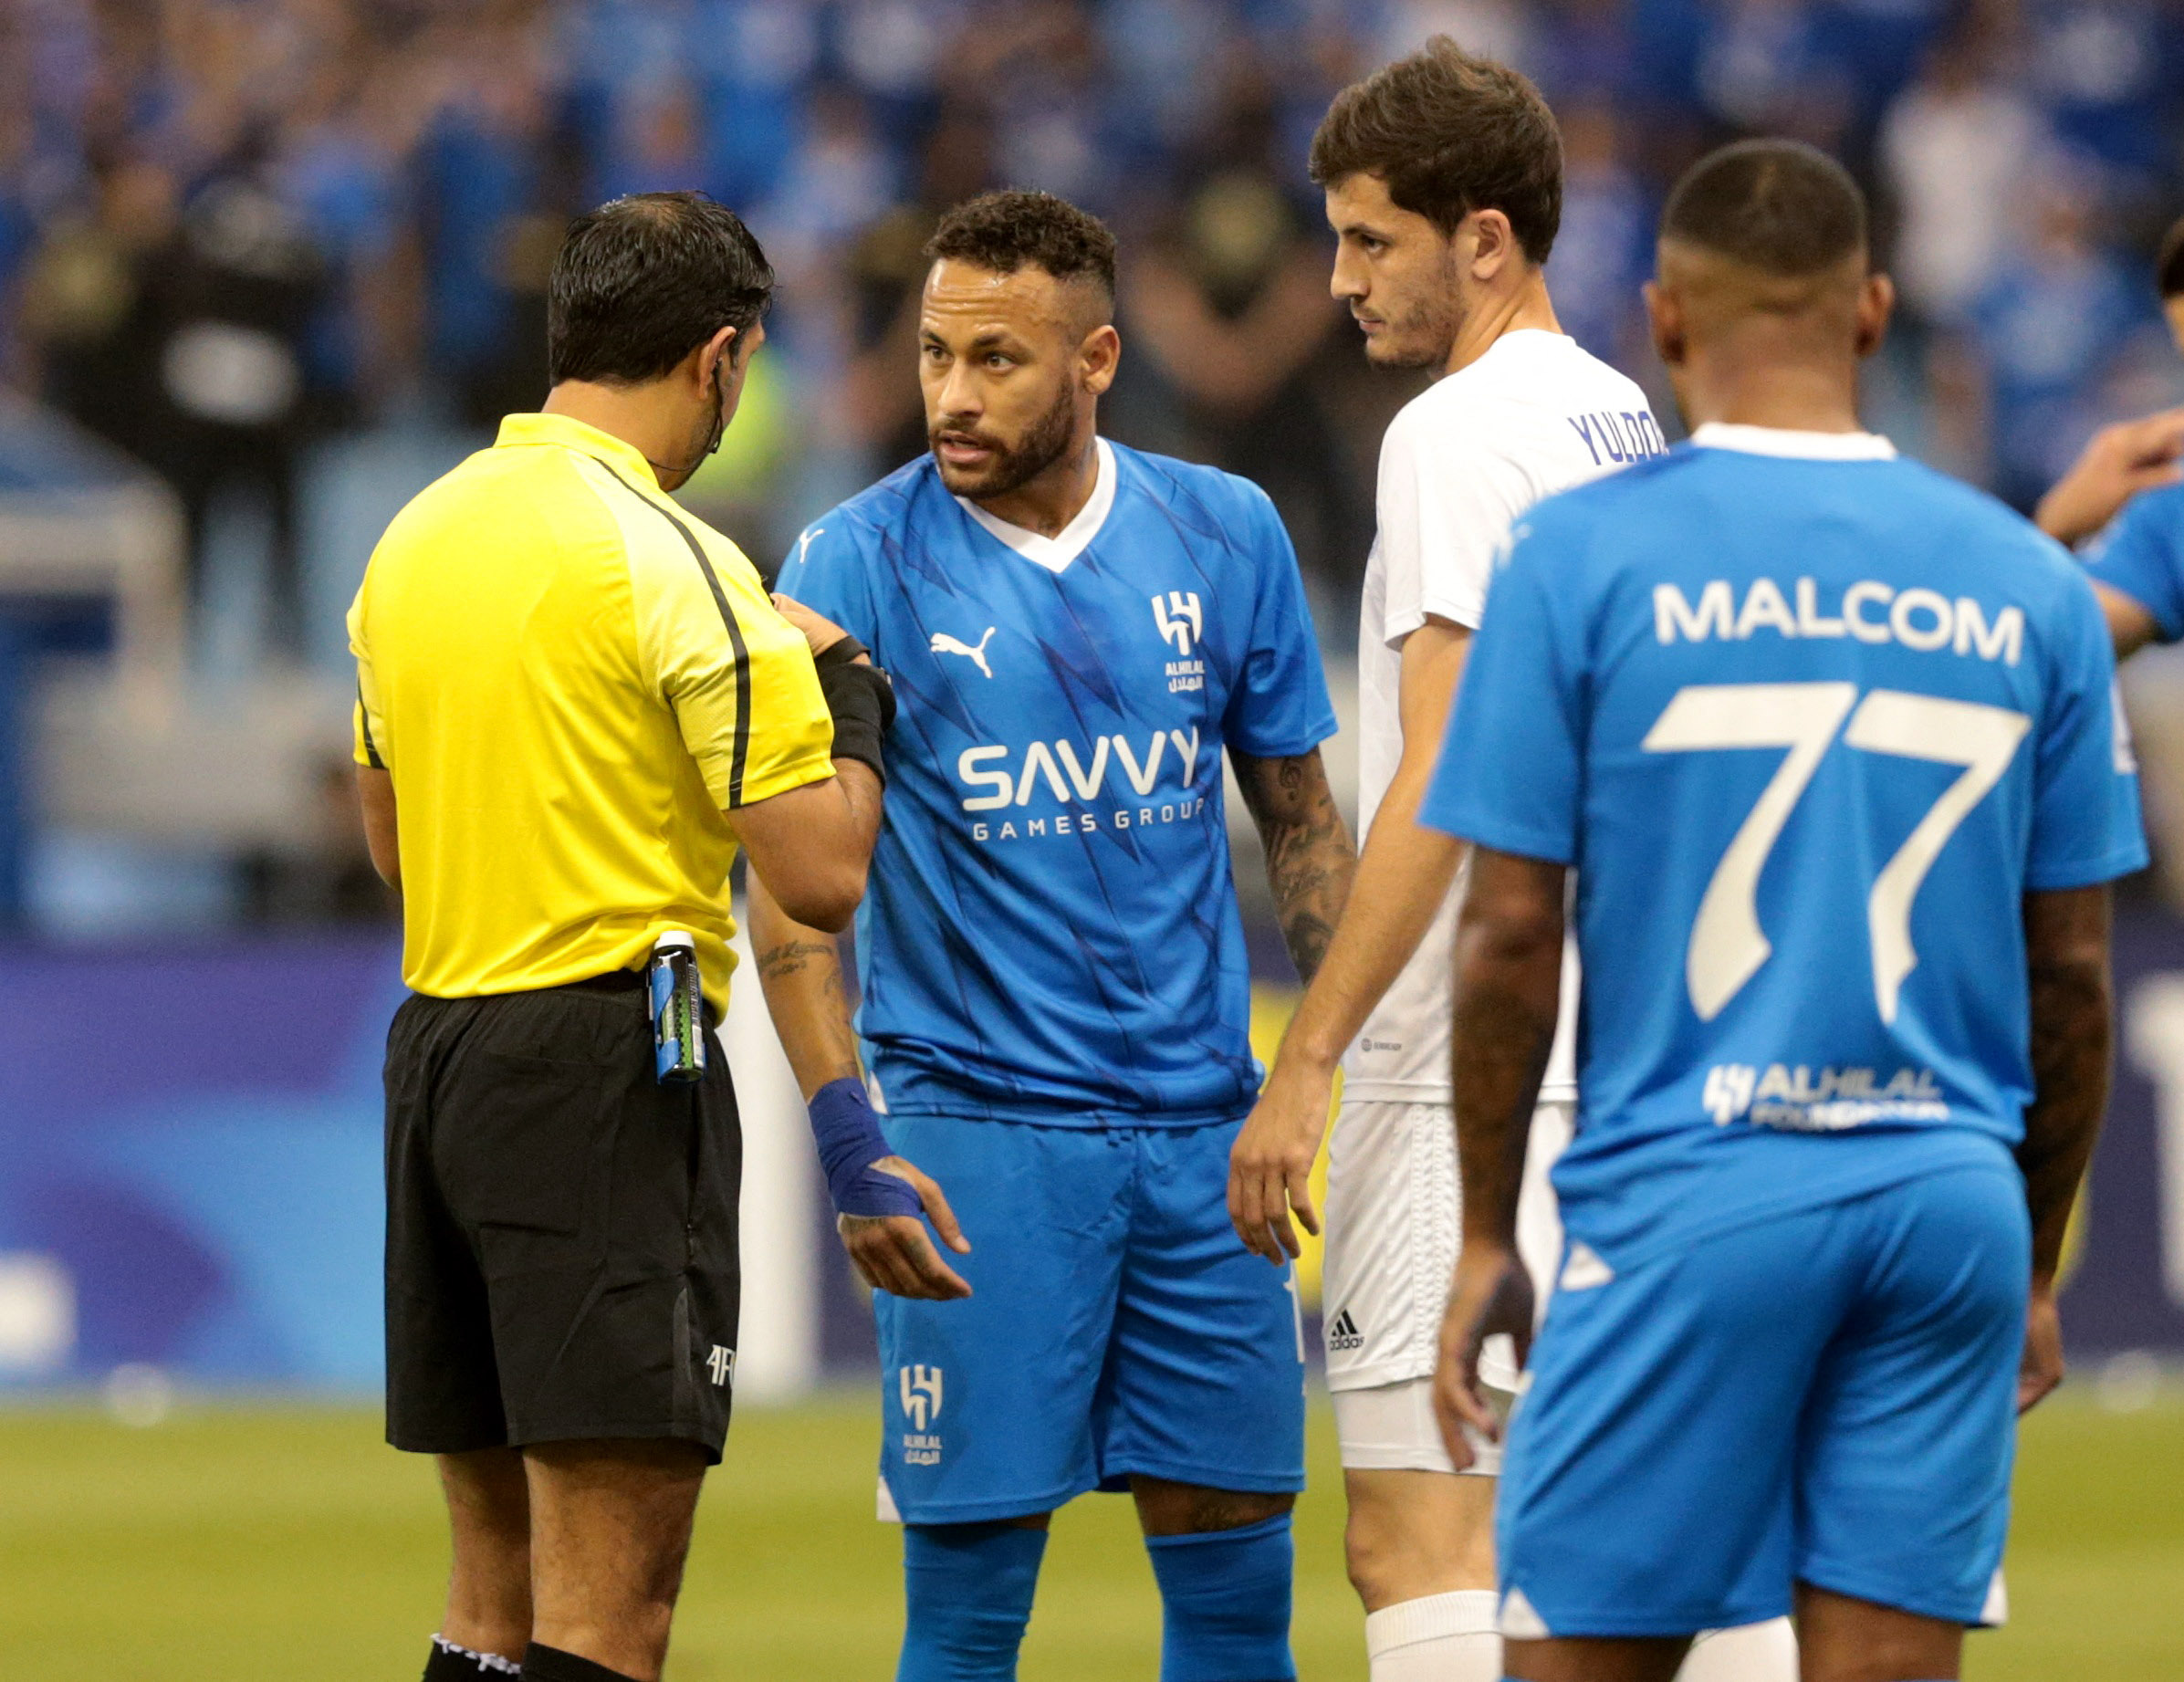 Neymar loses cool on AFC Champions League debut for Al-Hilal